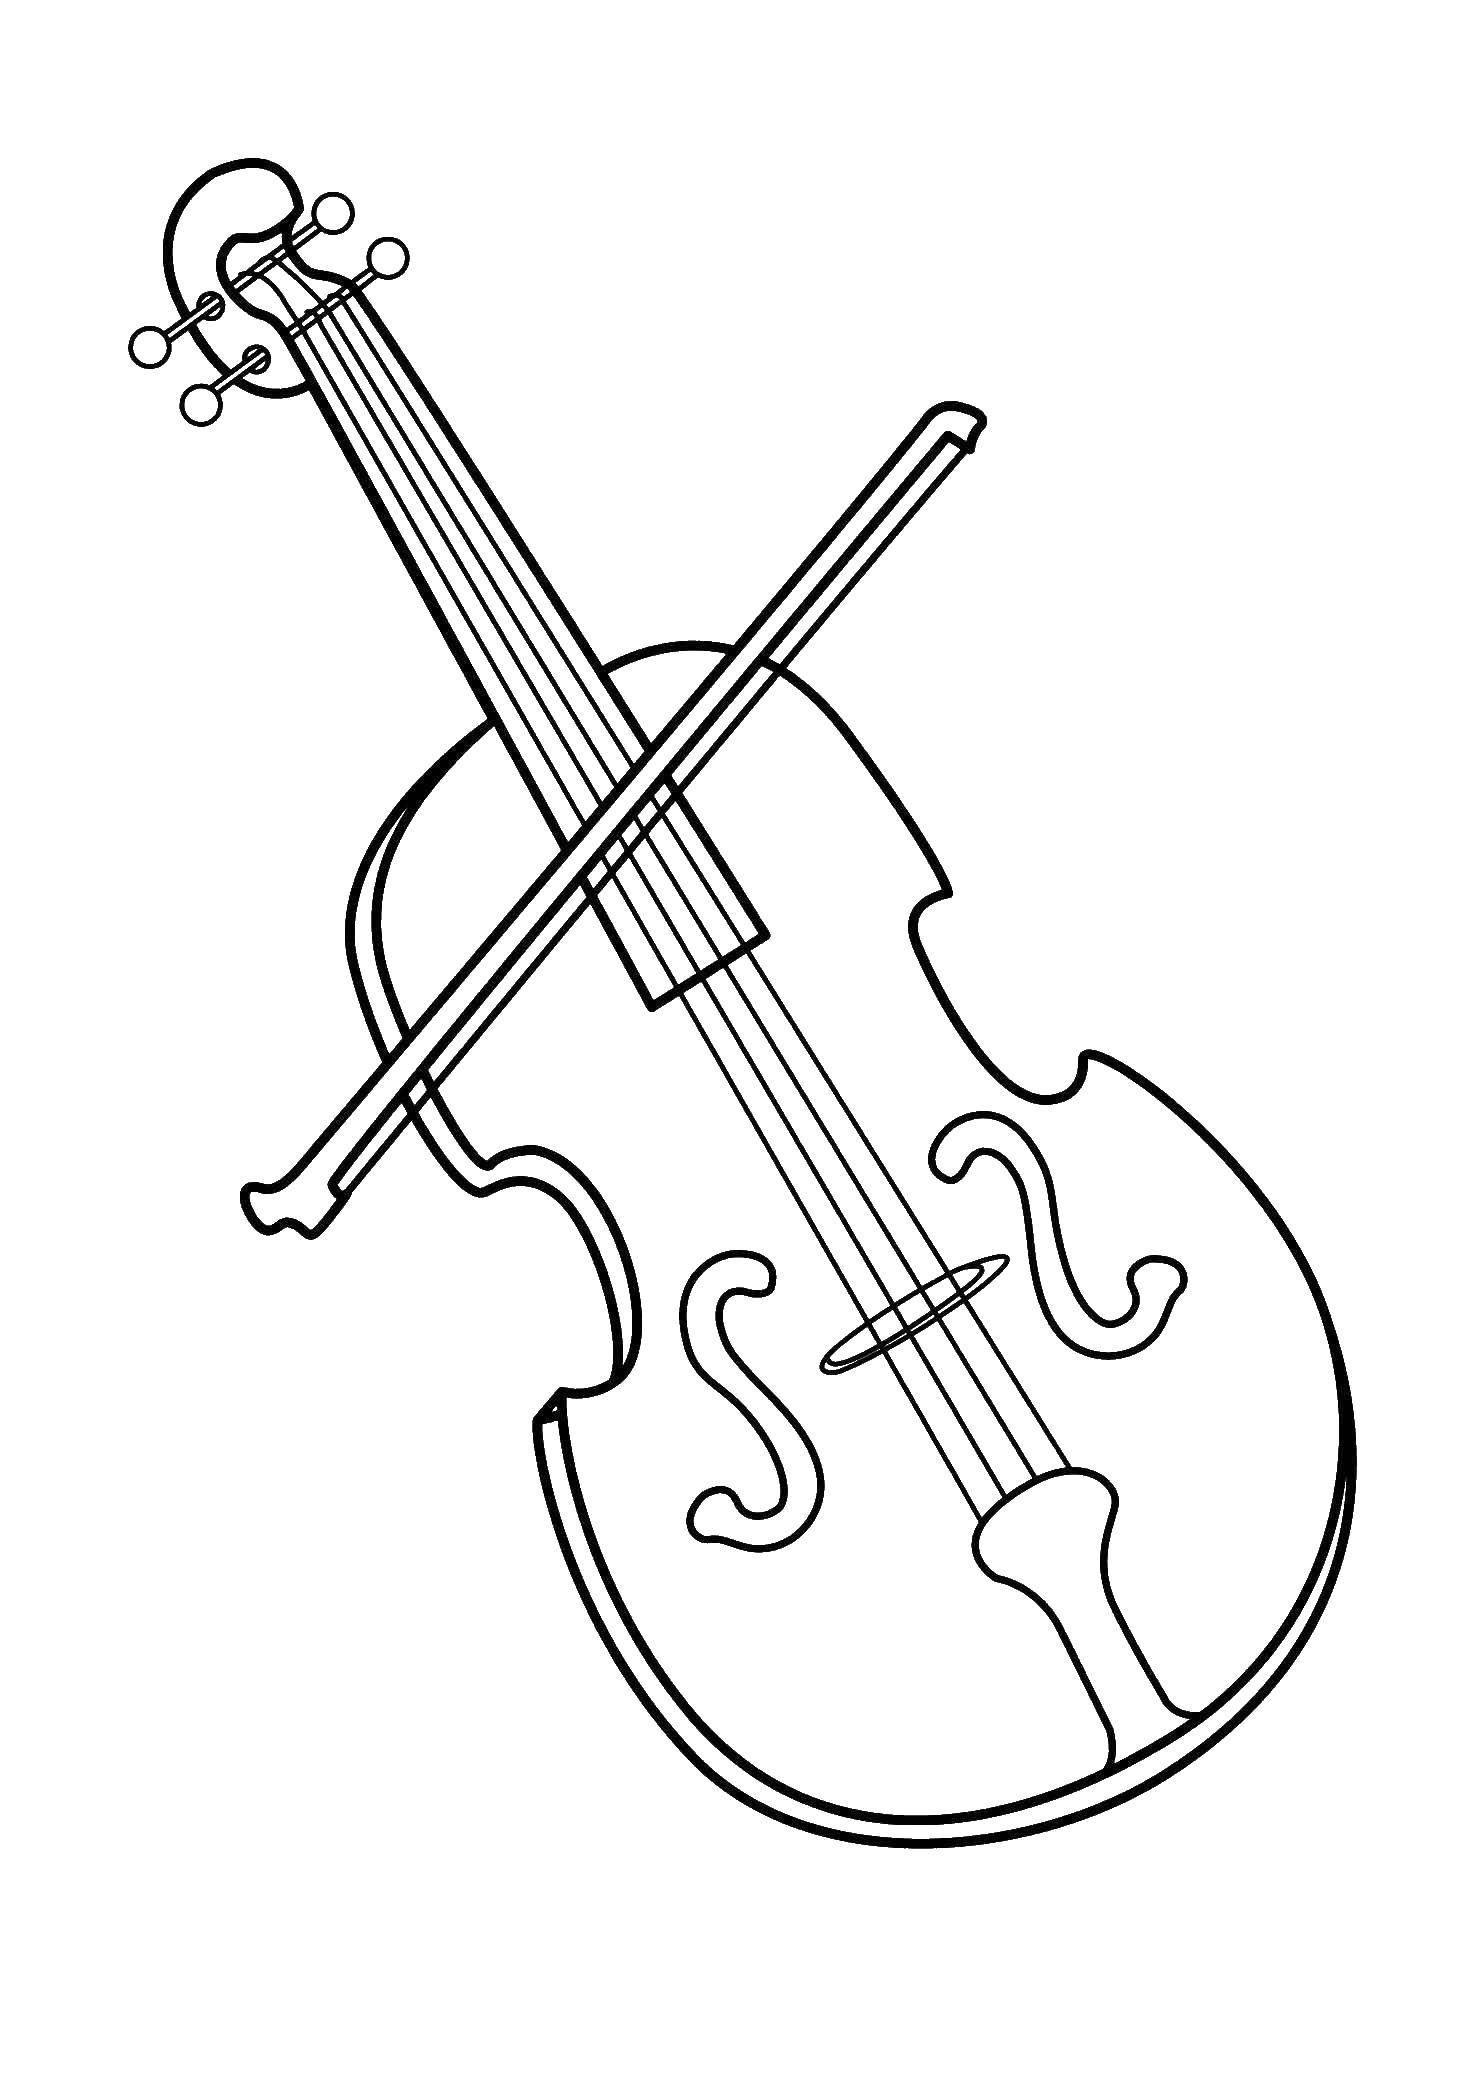 Coloring Cello. Category Musical instrument. Tags:  cello, musical instruments.